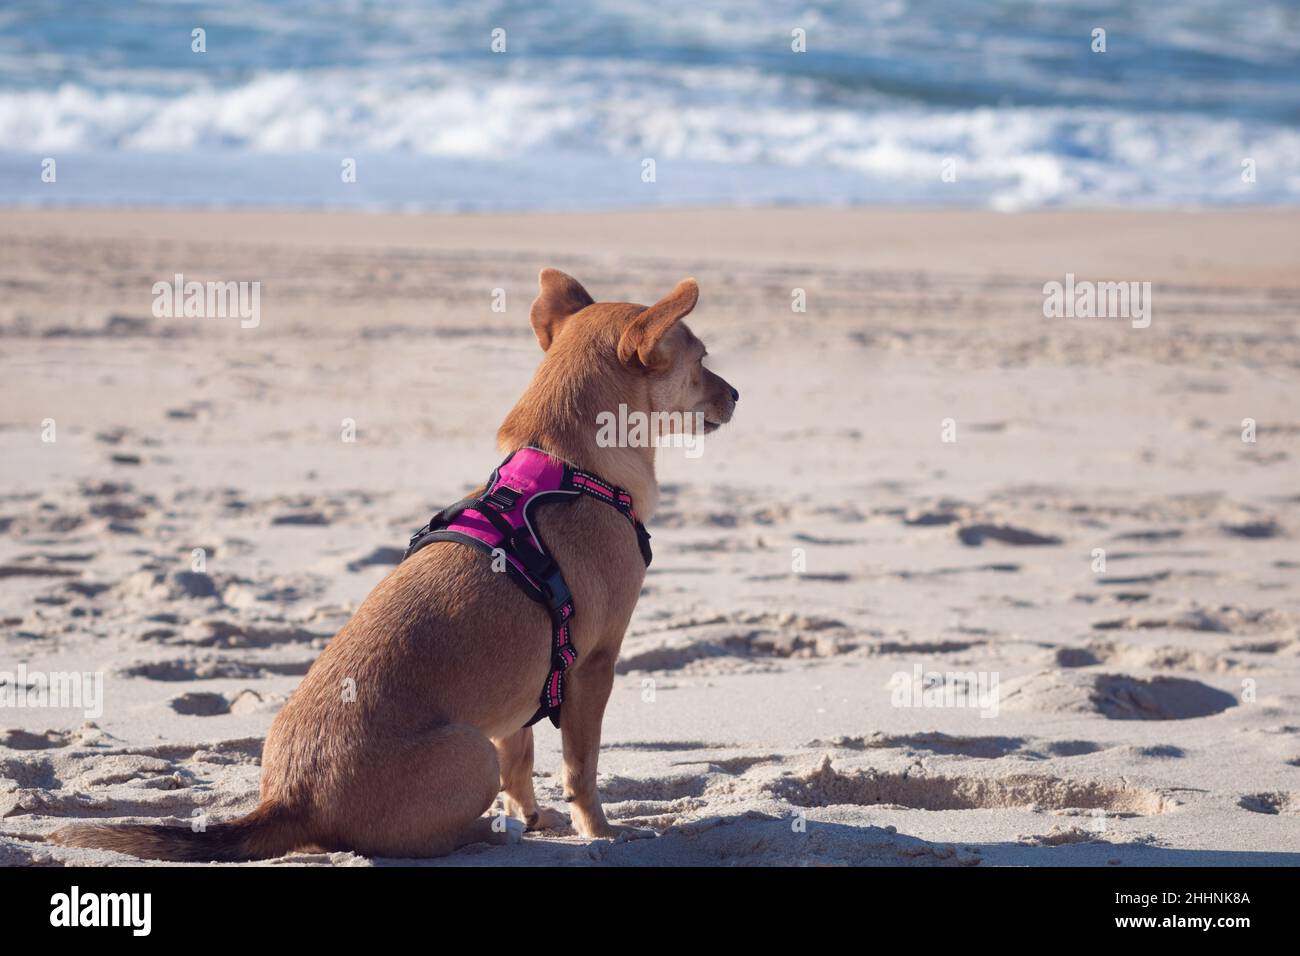 Back view of mixed-breed brown dog wearing a harness, sitting alone on the sand at the beach and looking out to the ocean on a sunny day Stock Photo